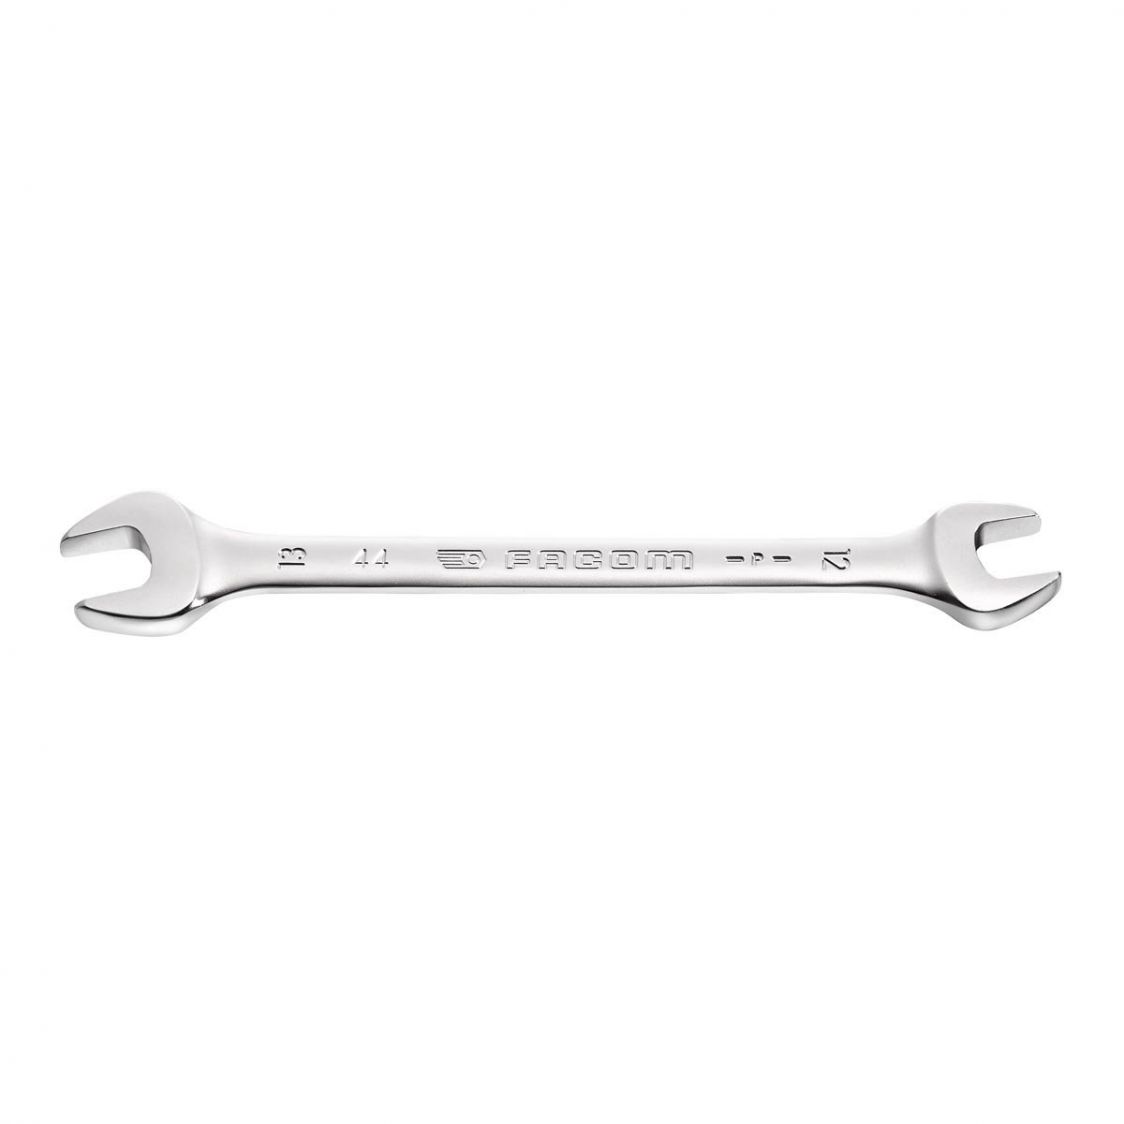 FACOM 44.26X28 - 26x28mm Metric Open Jaw Spanner